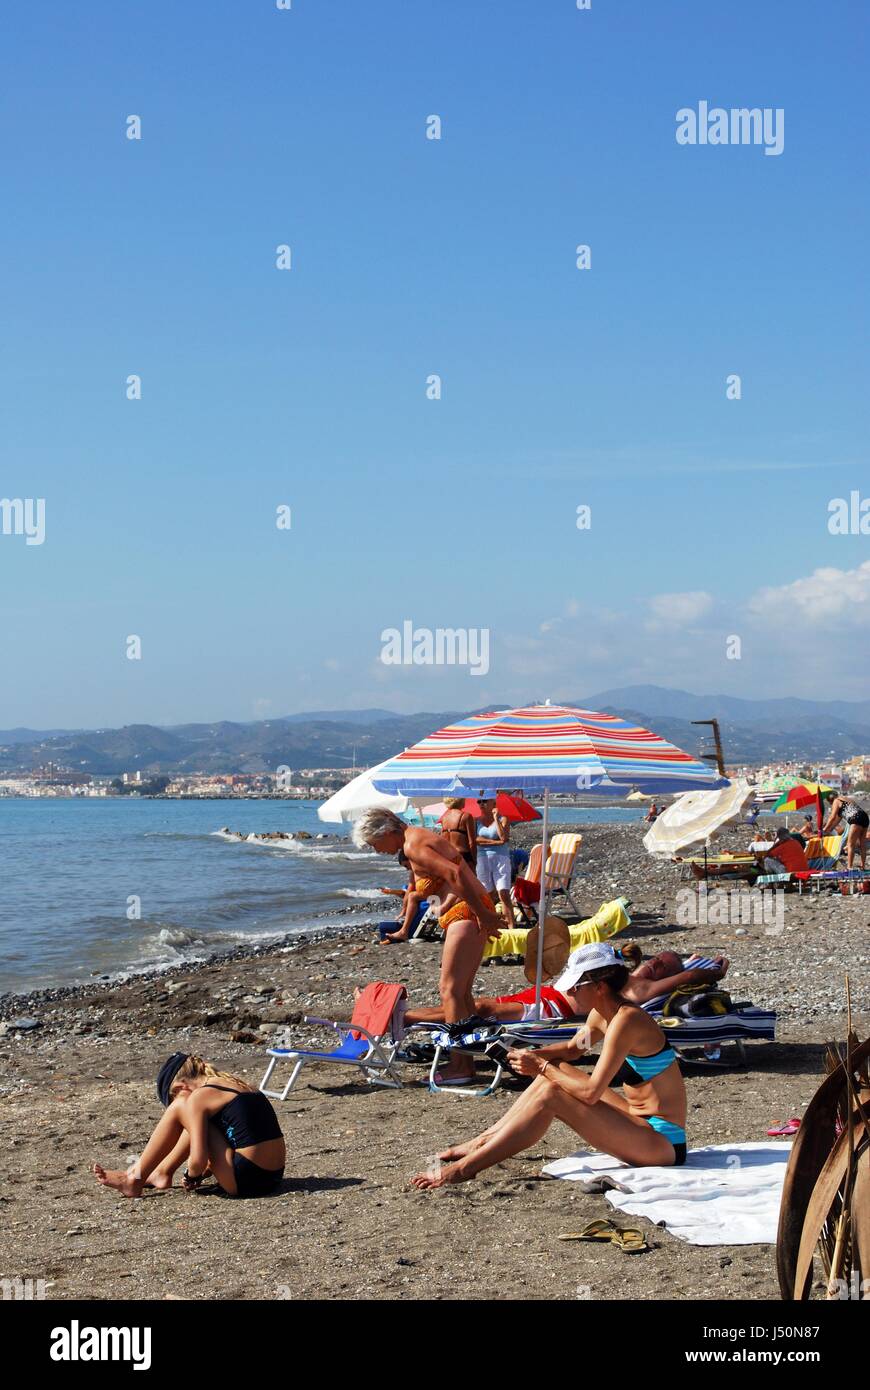 Tourists relaxing on the pebble beach, Lagos, Malaga Province, Andalusia, Spain, Western Europe. Stock Photo